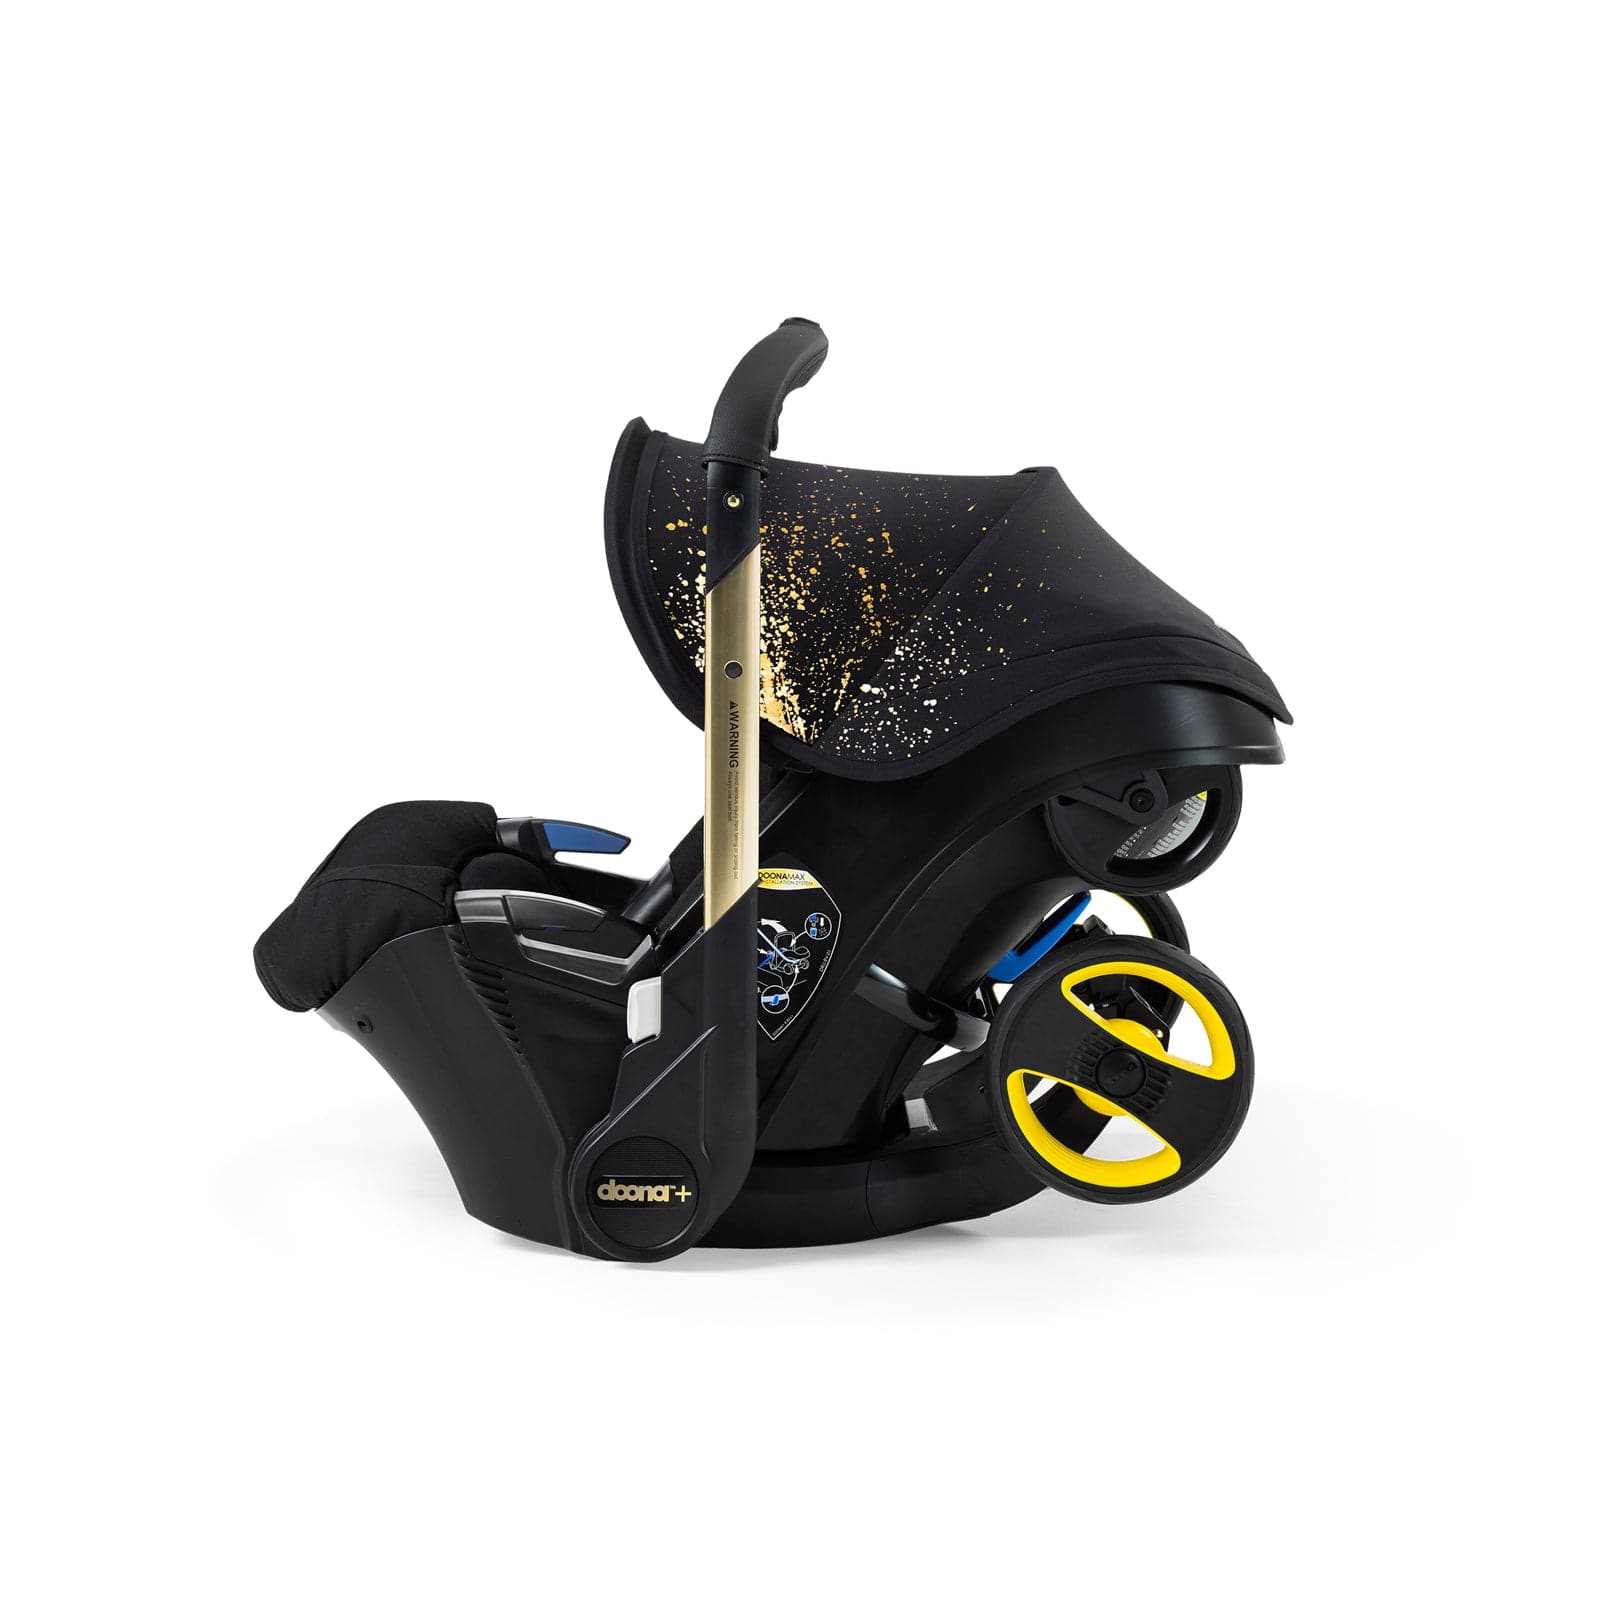 Doona+ Infant Car Seat Stroller Limited Edition - Gold -  | For Your Little One